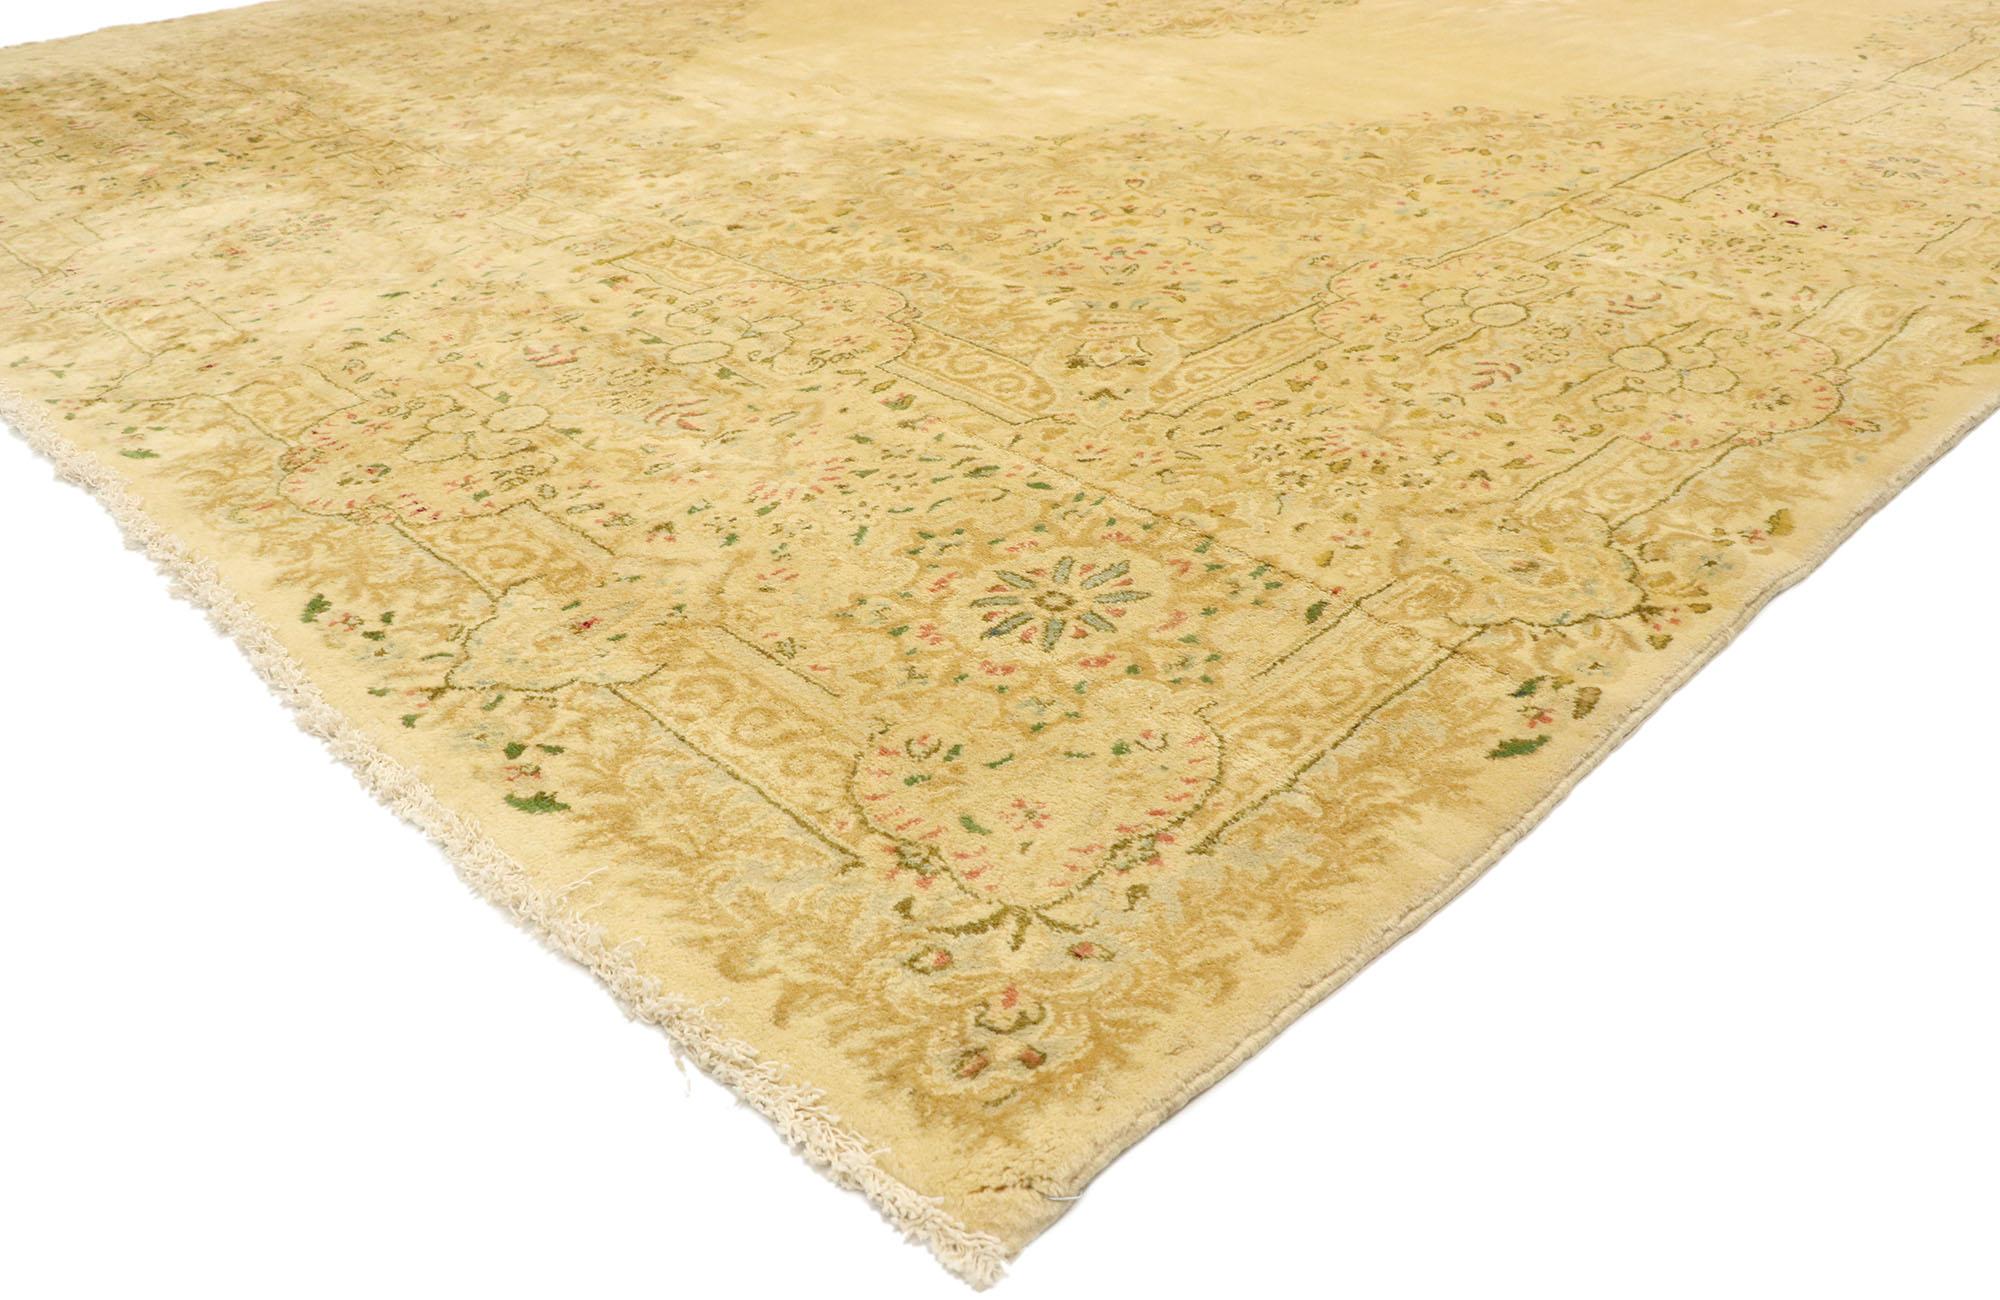 74207, vintage Persian Kerman Palace rug with European Country cottage style. Inspired from Savonnerie and French Aubusson carpets, this vintage Persian Kerman palace rug is a true impression of luscious splendor and European Country Cottage style.